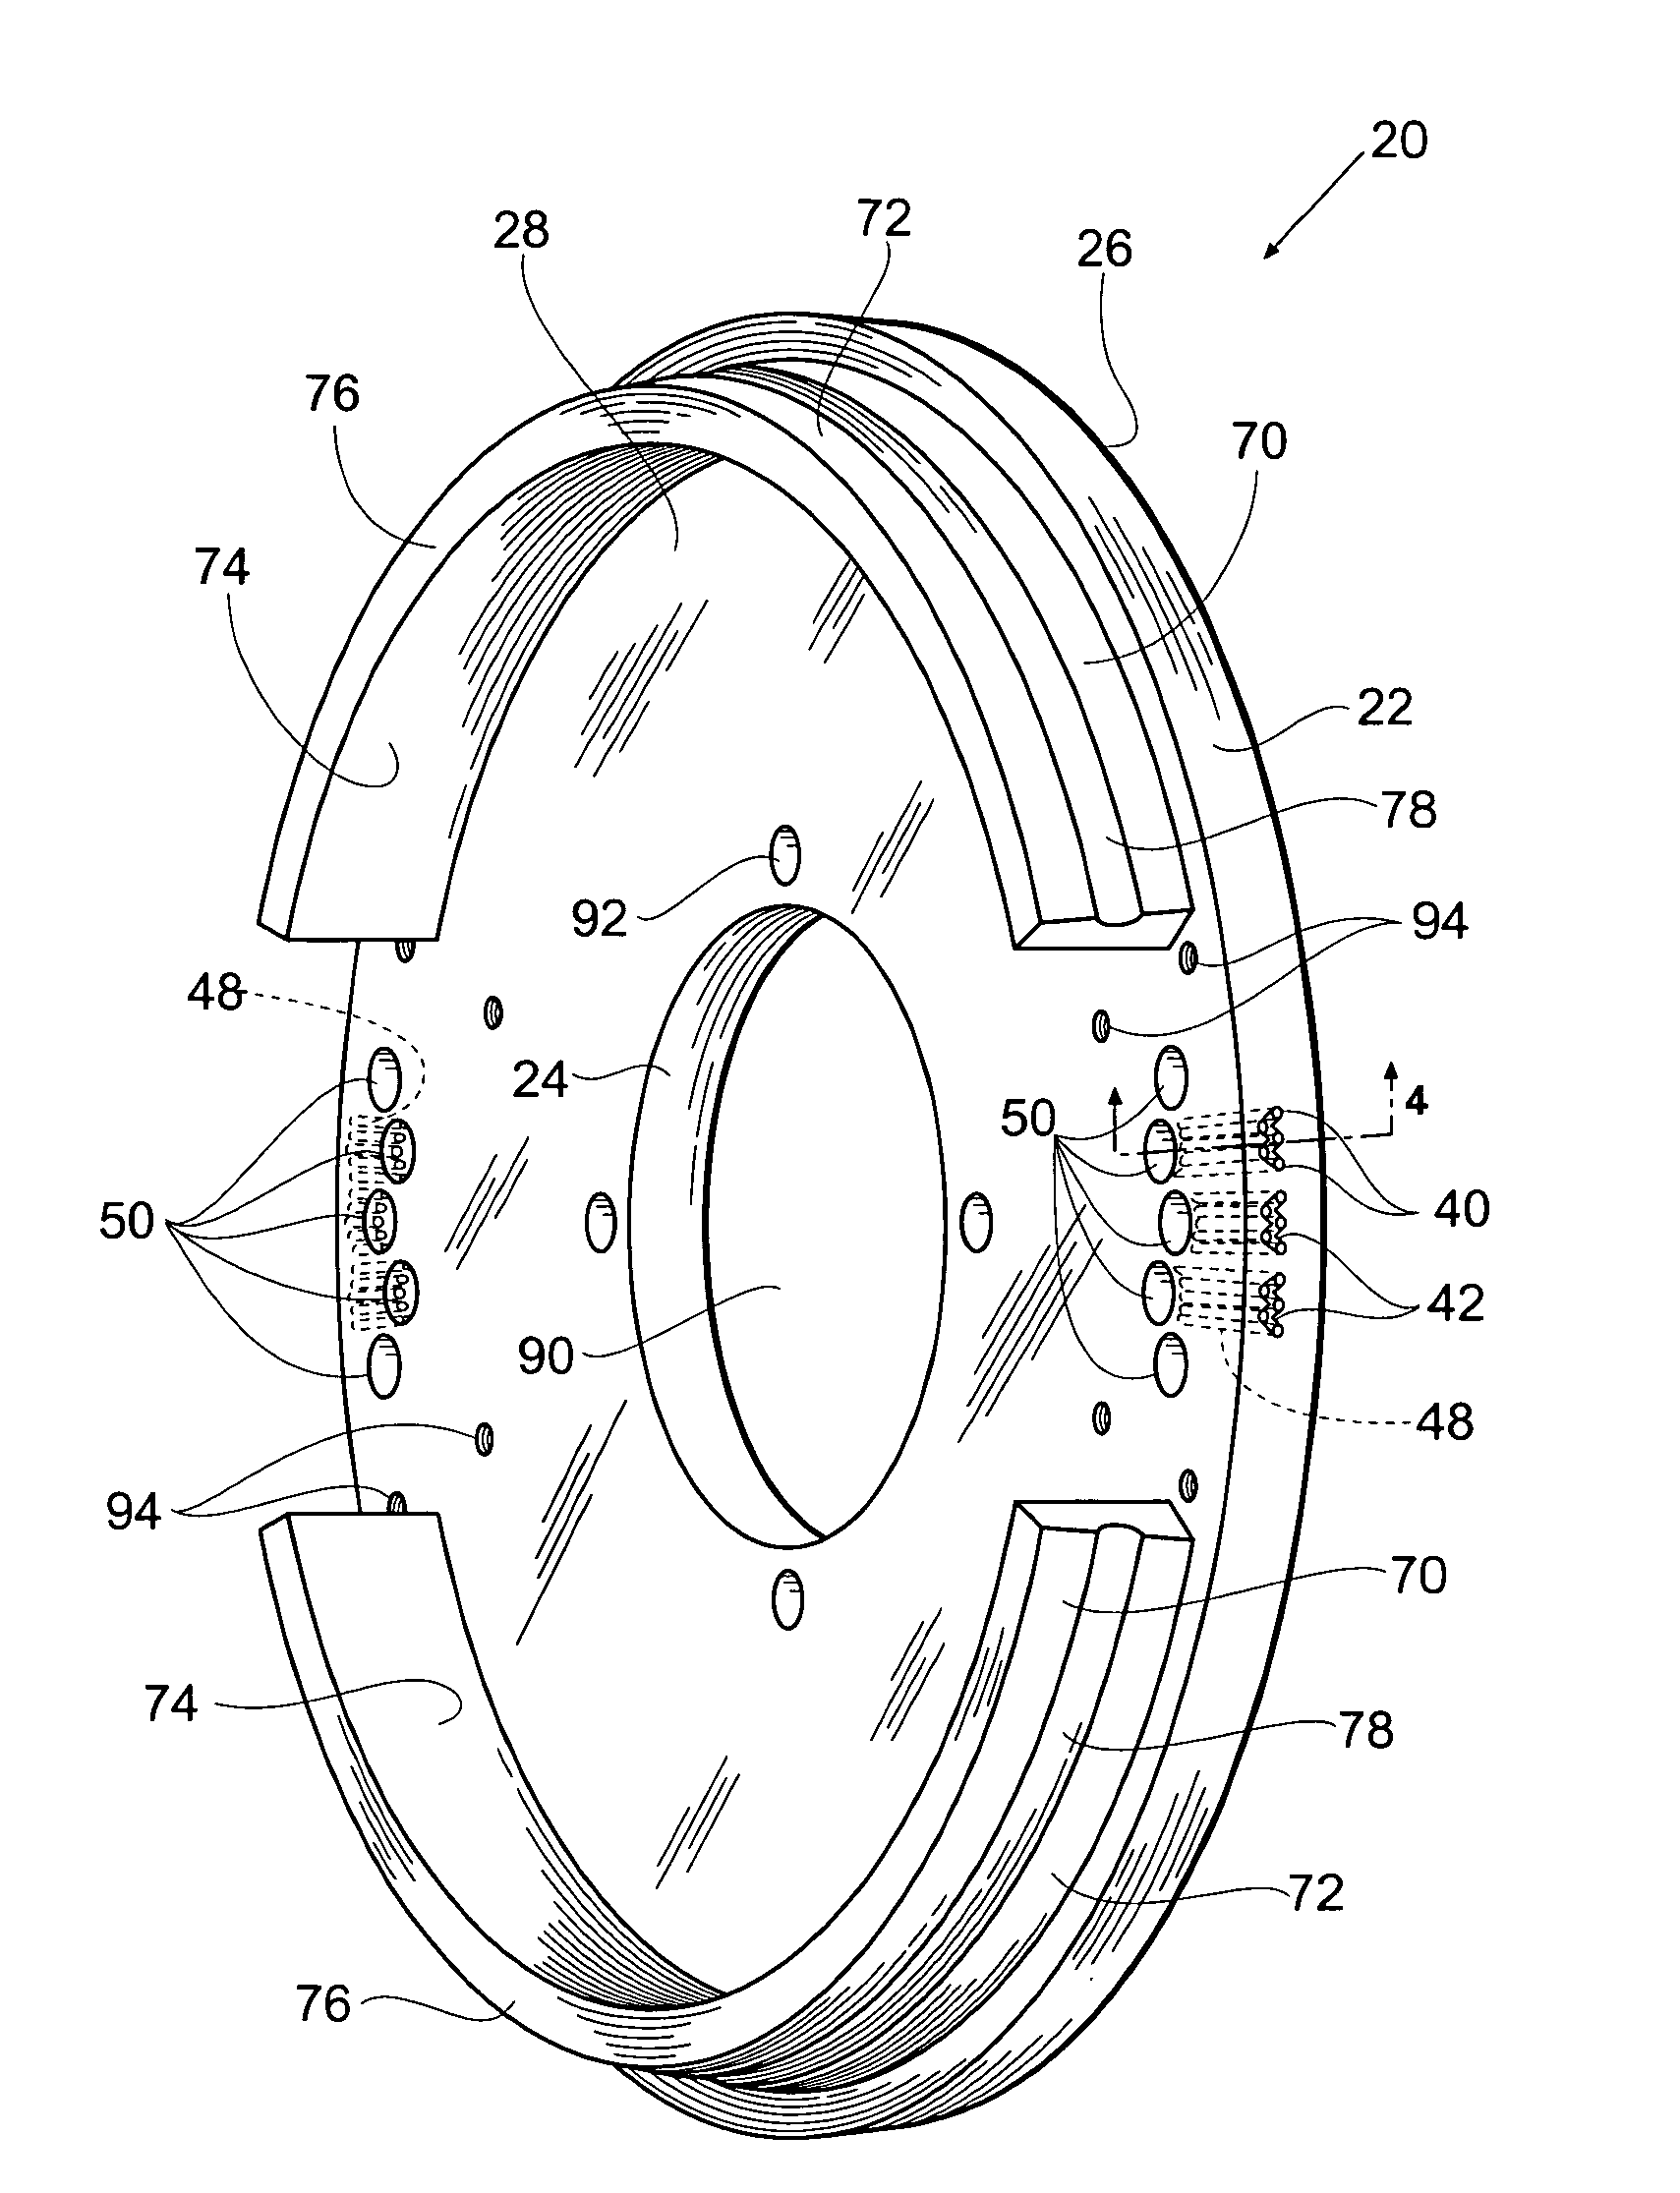 Method and apparatus for securing stretchable film using vacuum